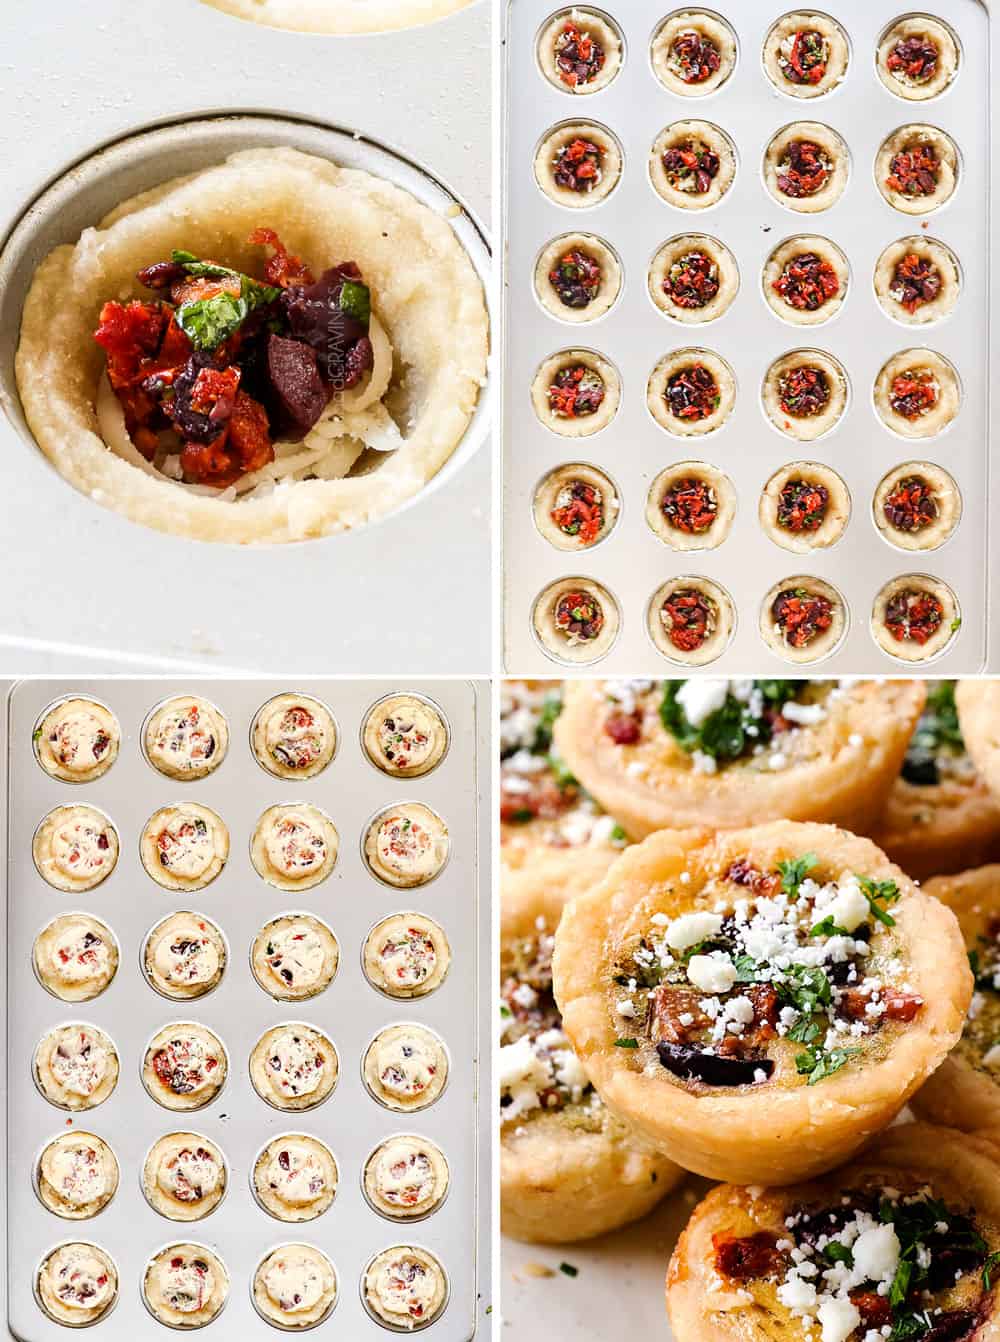 a collage showing how to make mini quiche by adding sun-dried tomatoes, olives, feta to pastry, adding custard and baking